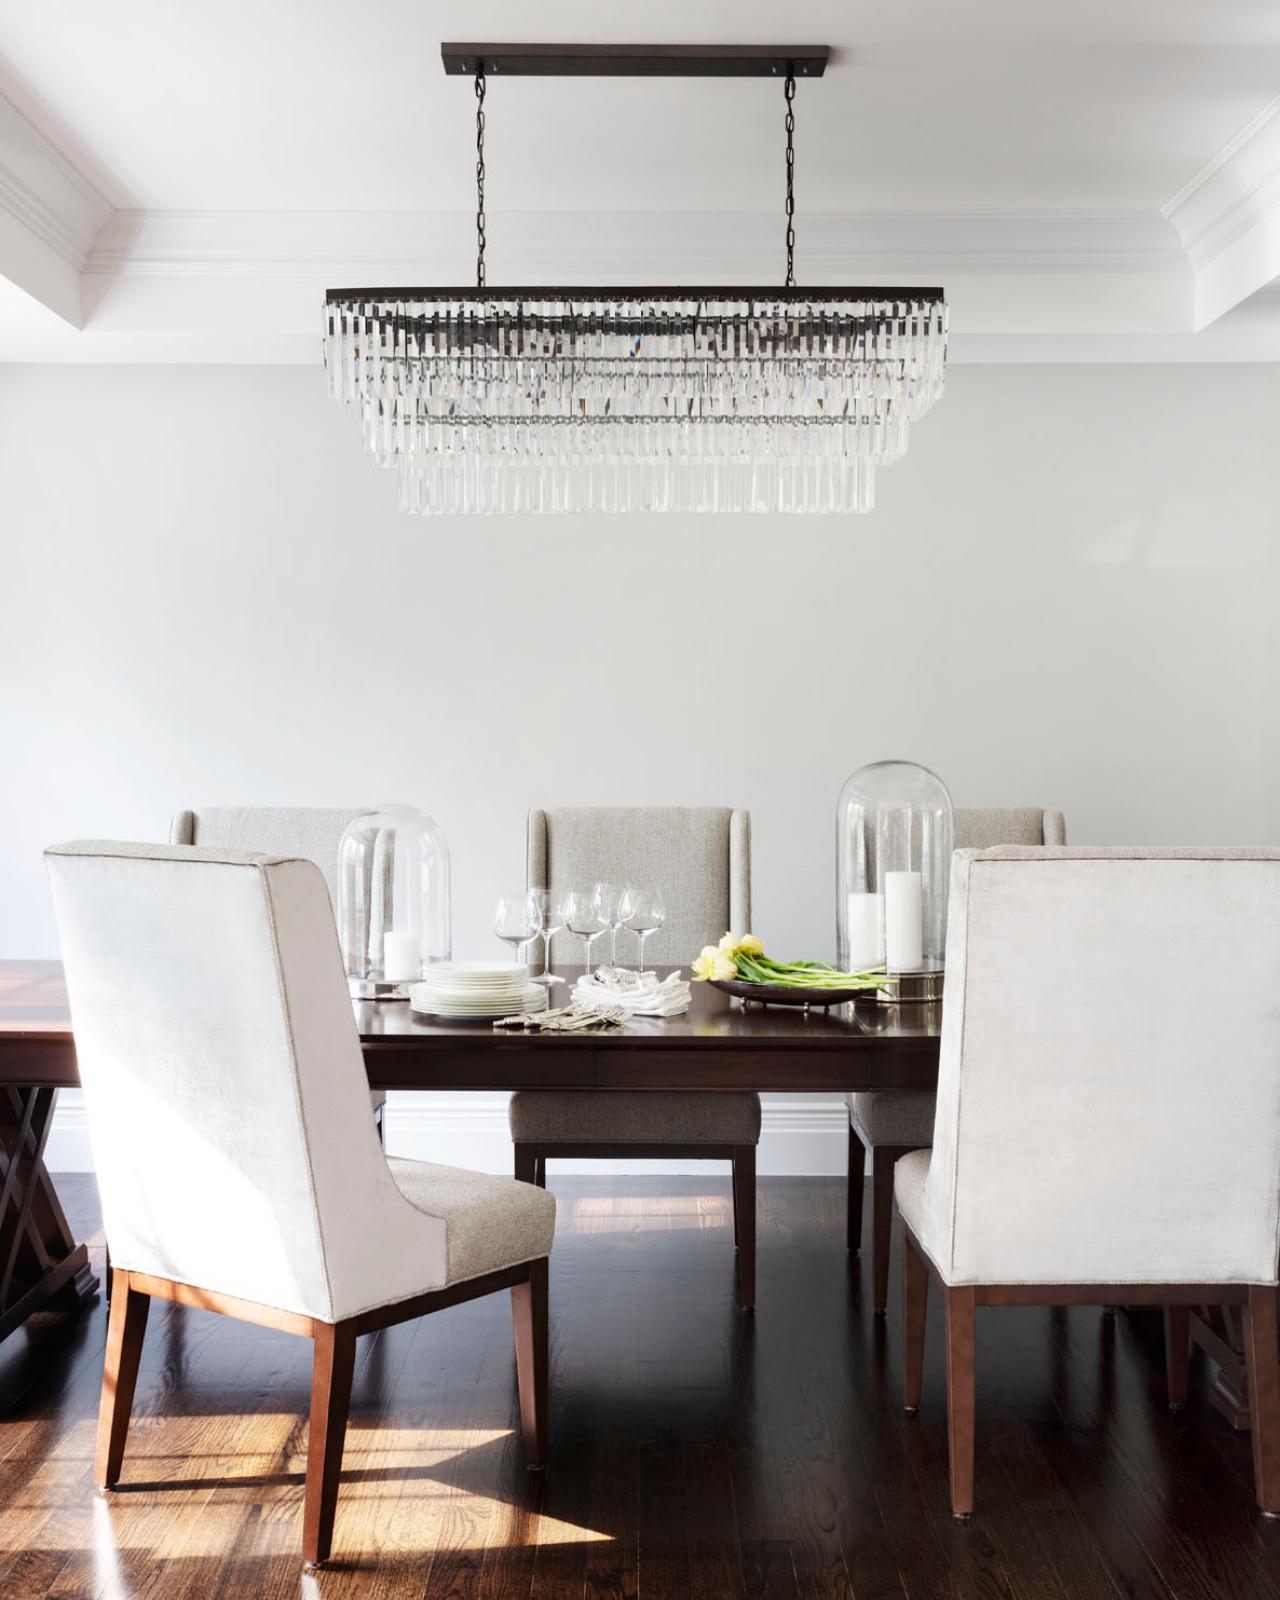 How To Choose Dining Room Lighting, How High Should A Light Fixture Hang Over Dining Room Table